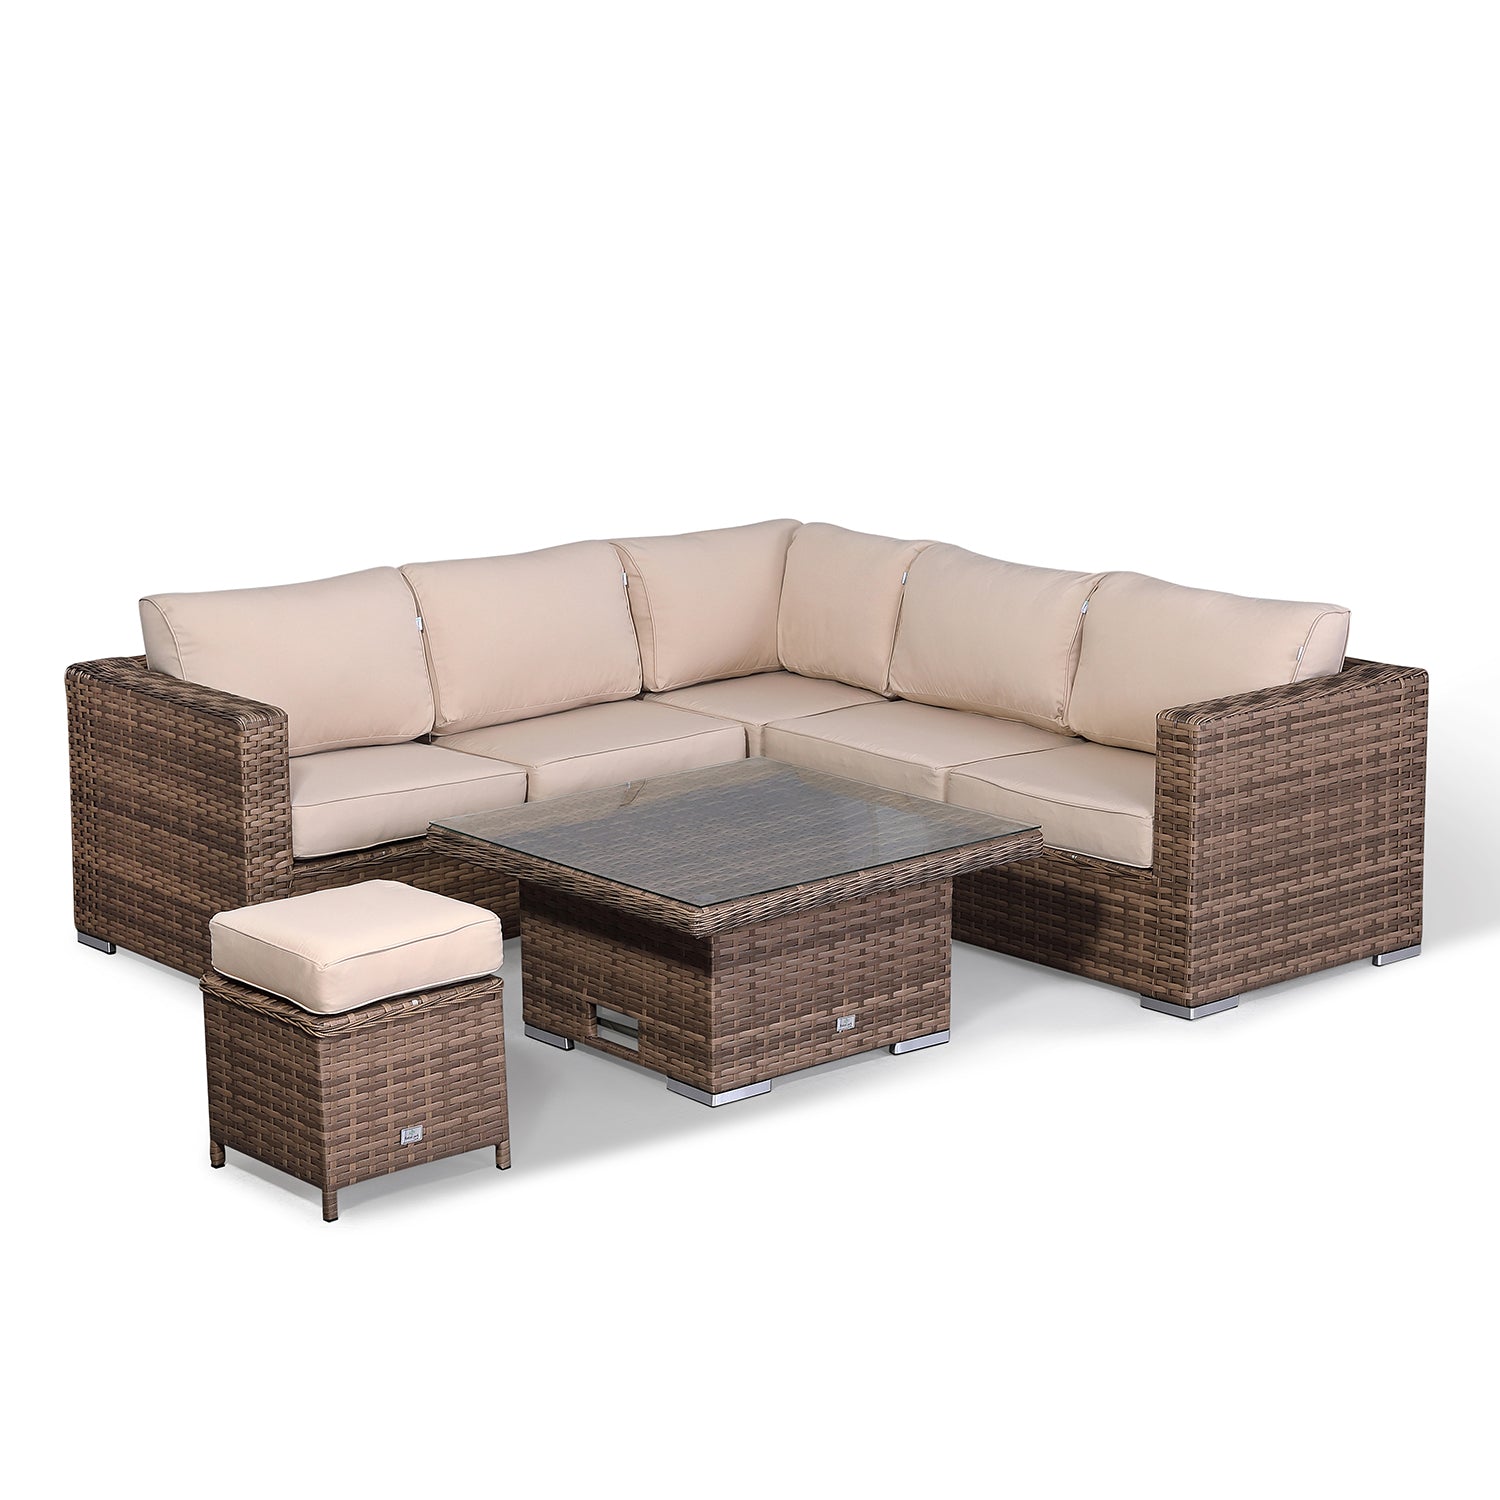 Rattan park Durley Range Square Corner Sofa Set with Rising Table in Brown weave